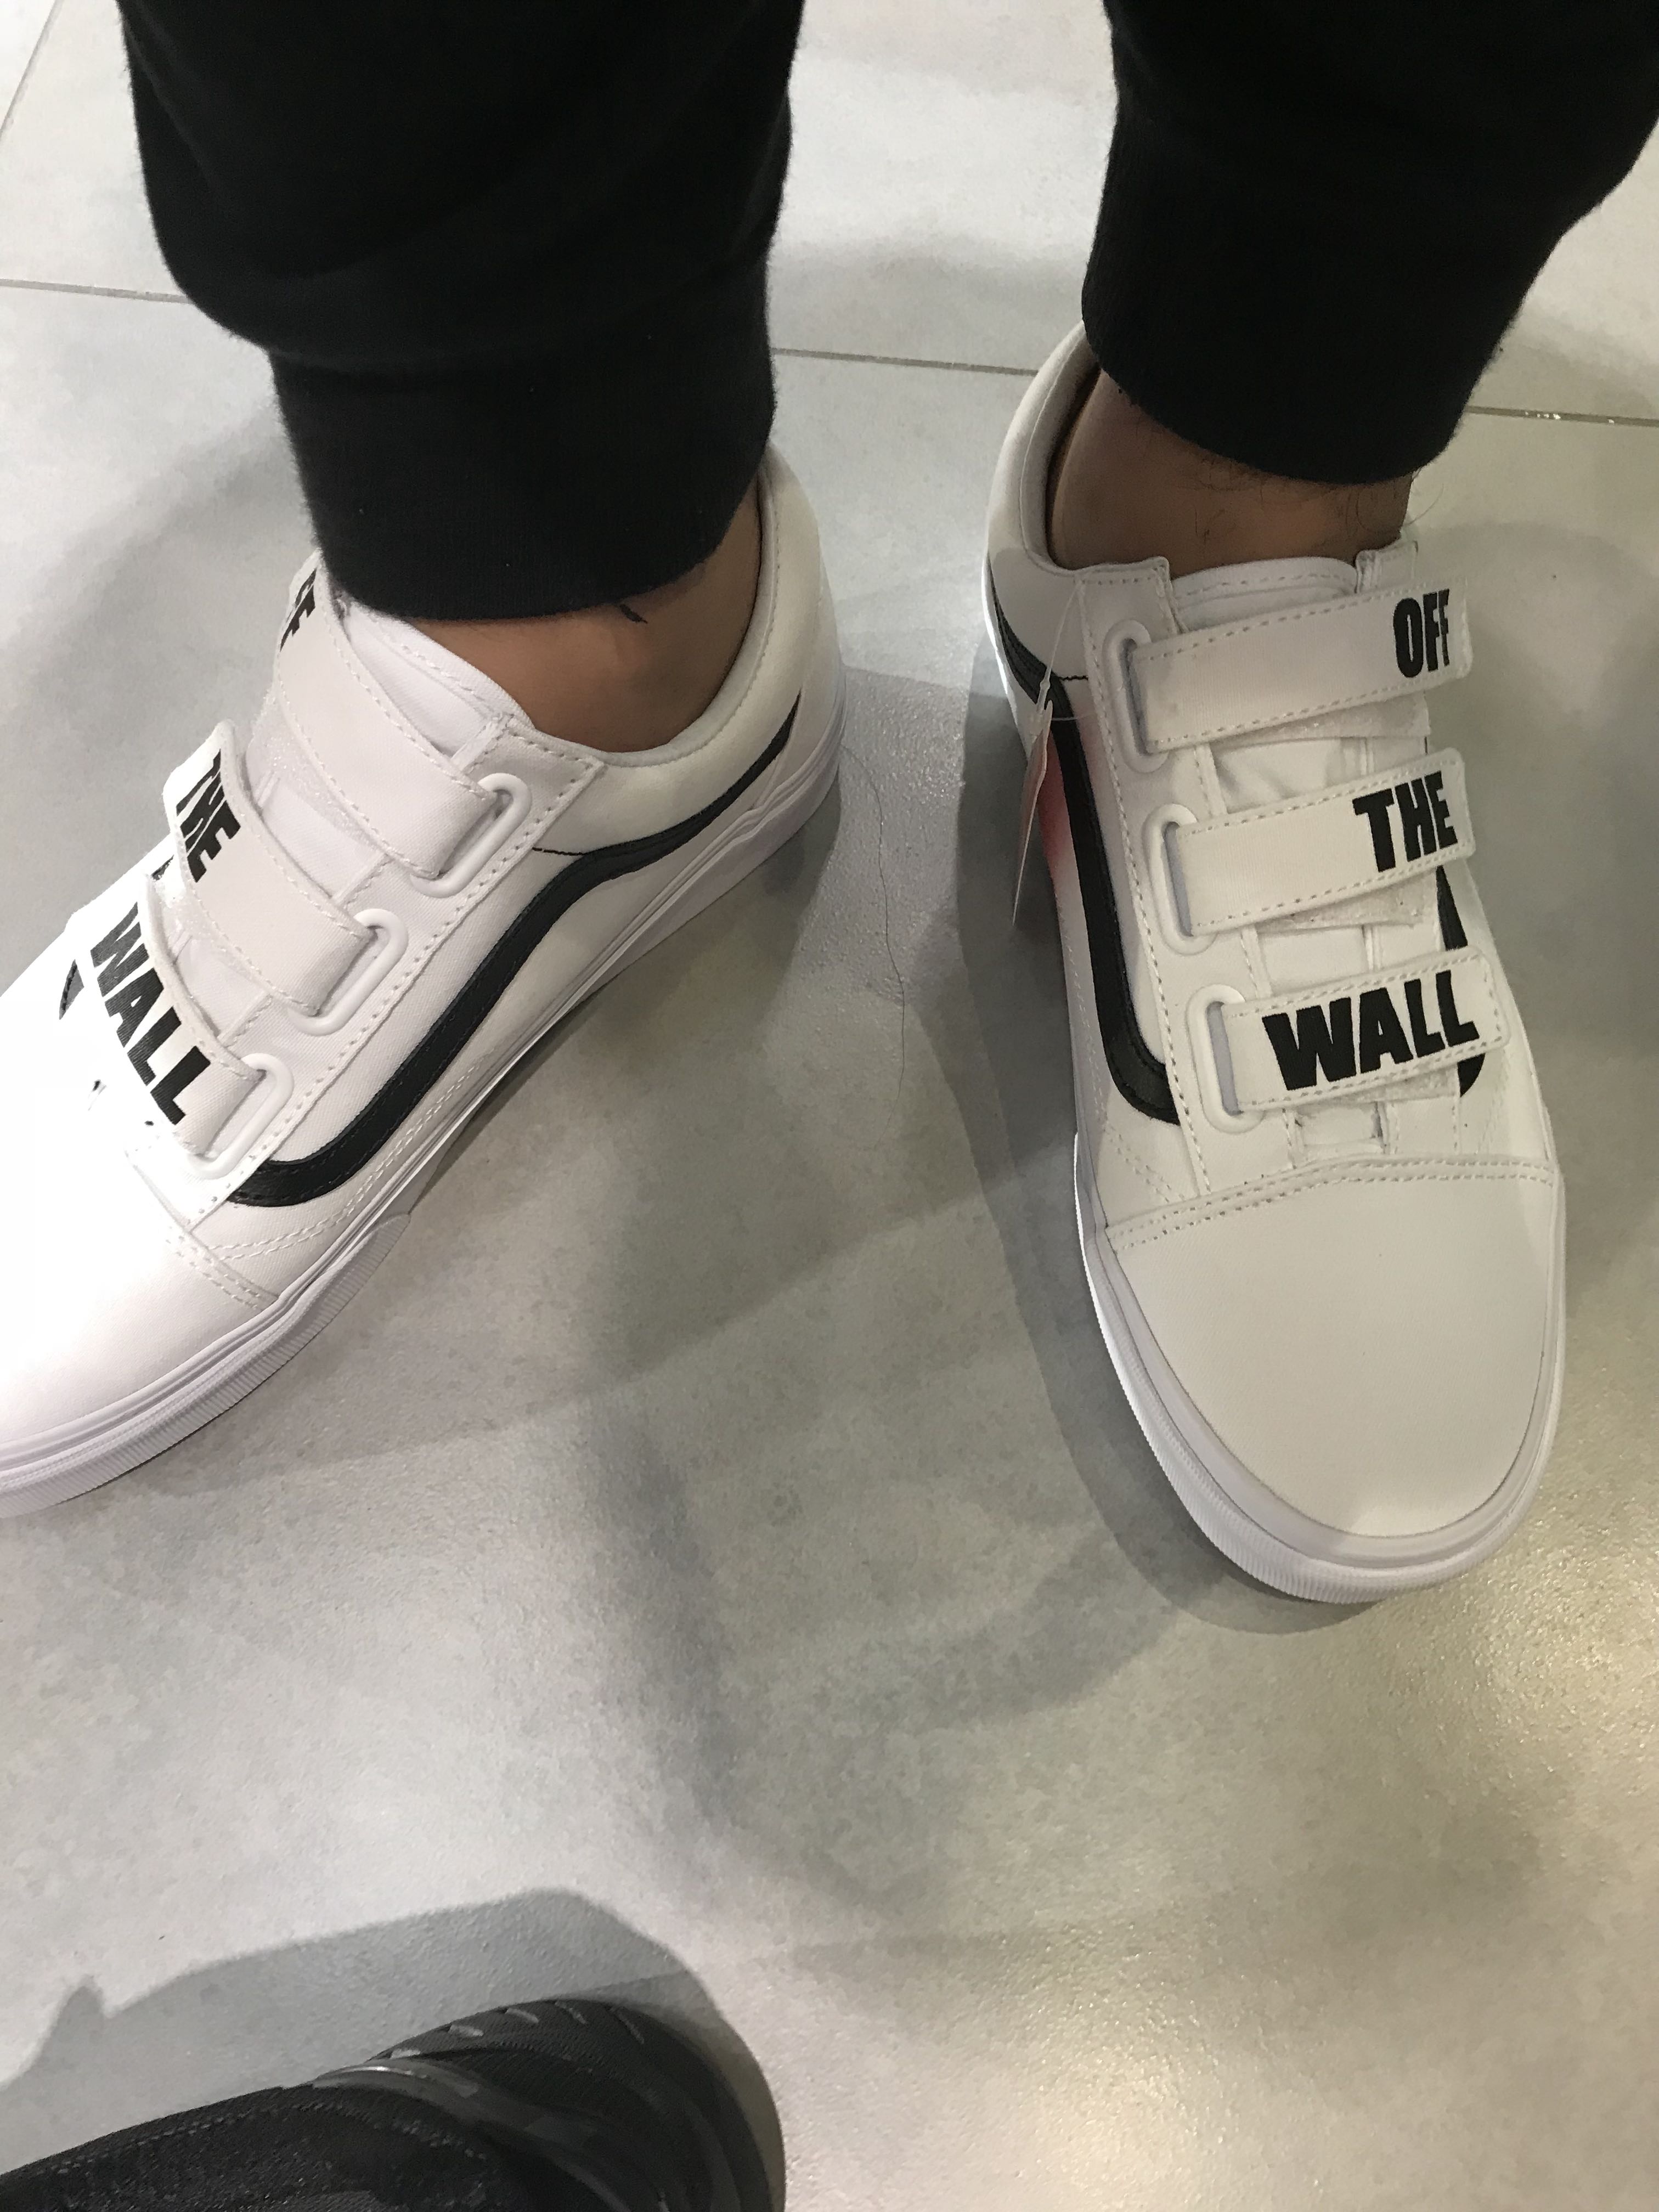 vans off the wall strap shoes